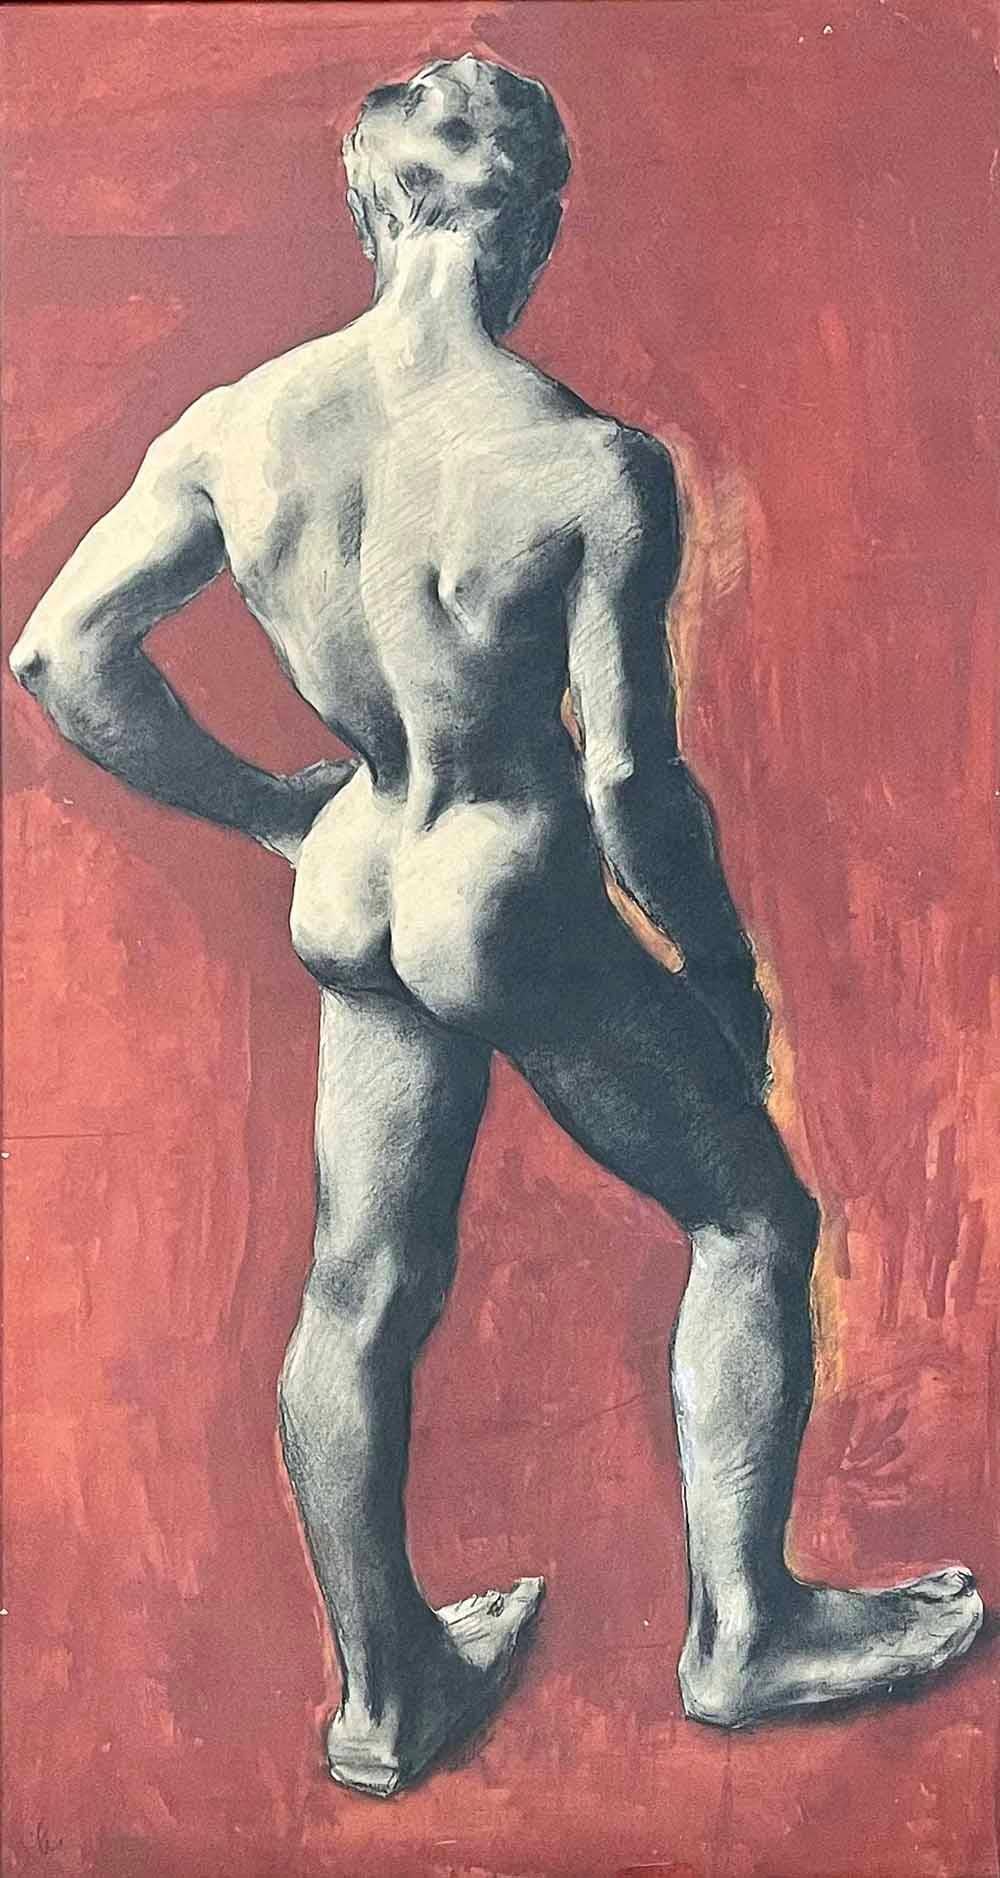 Bold and striking, this large 1950s painting of a nude male youth, executed in black gouache or charcoal on a rich, deep red ground, was made by Christopher Clark.  The artist is best known for his Art Deco paintings, and indeed he worked with